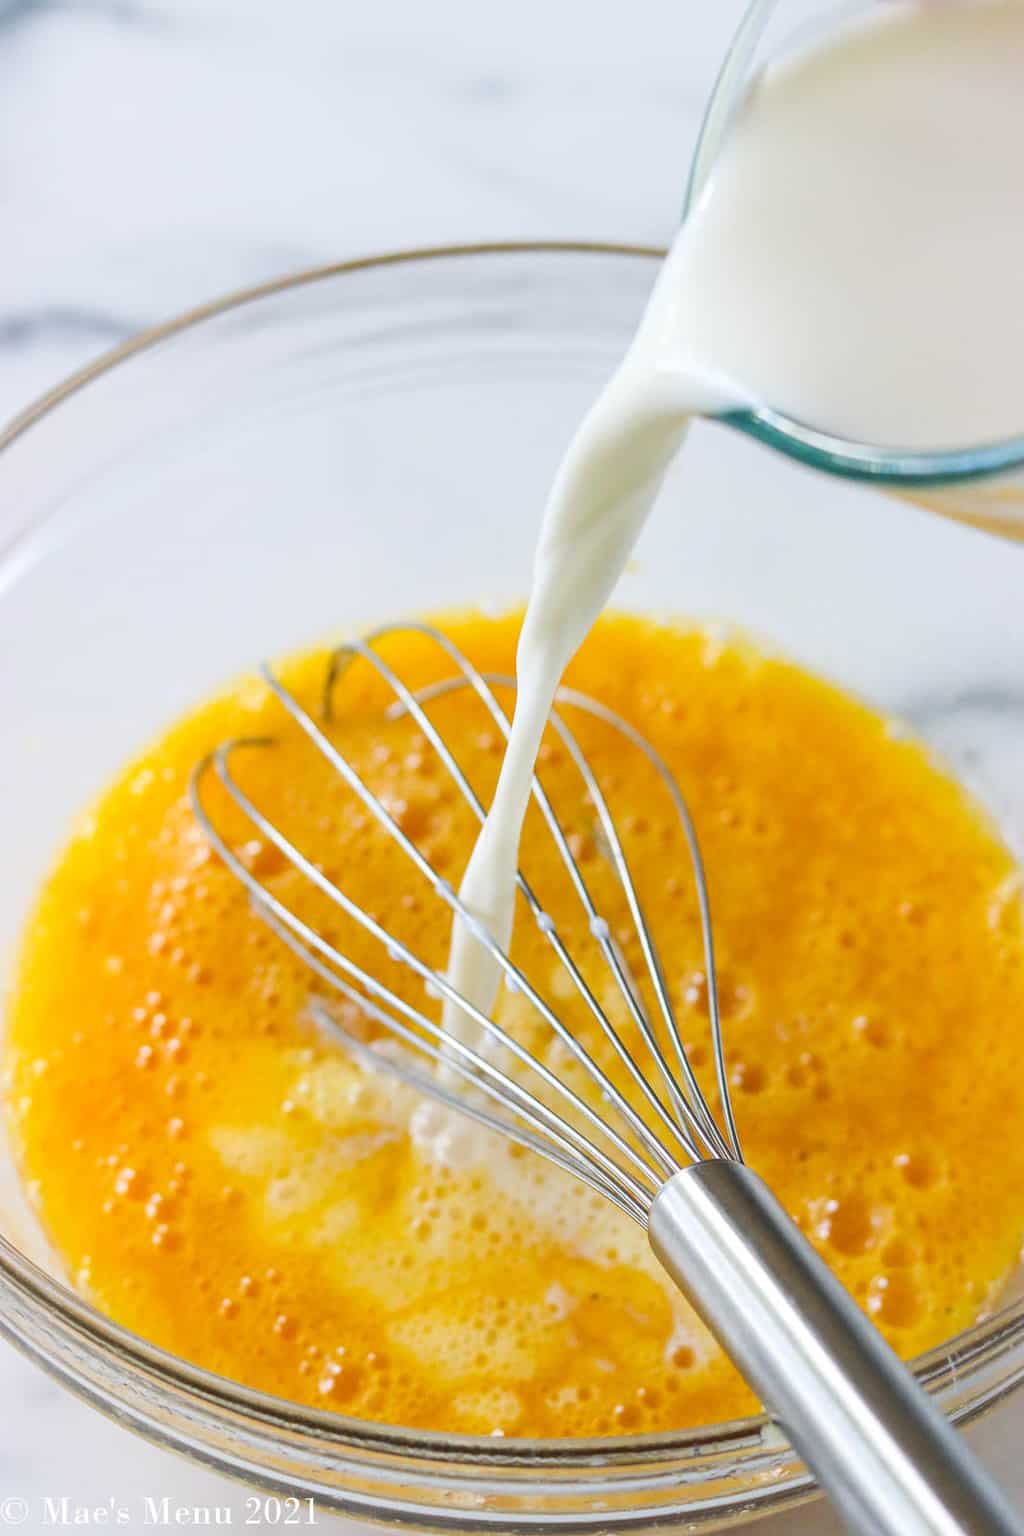 Pouring milk into the whisked eggs